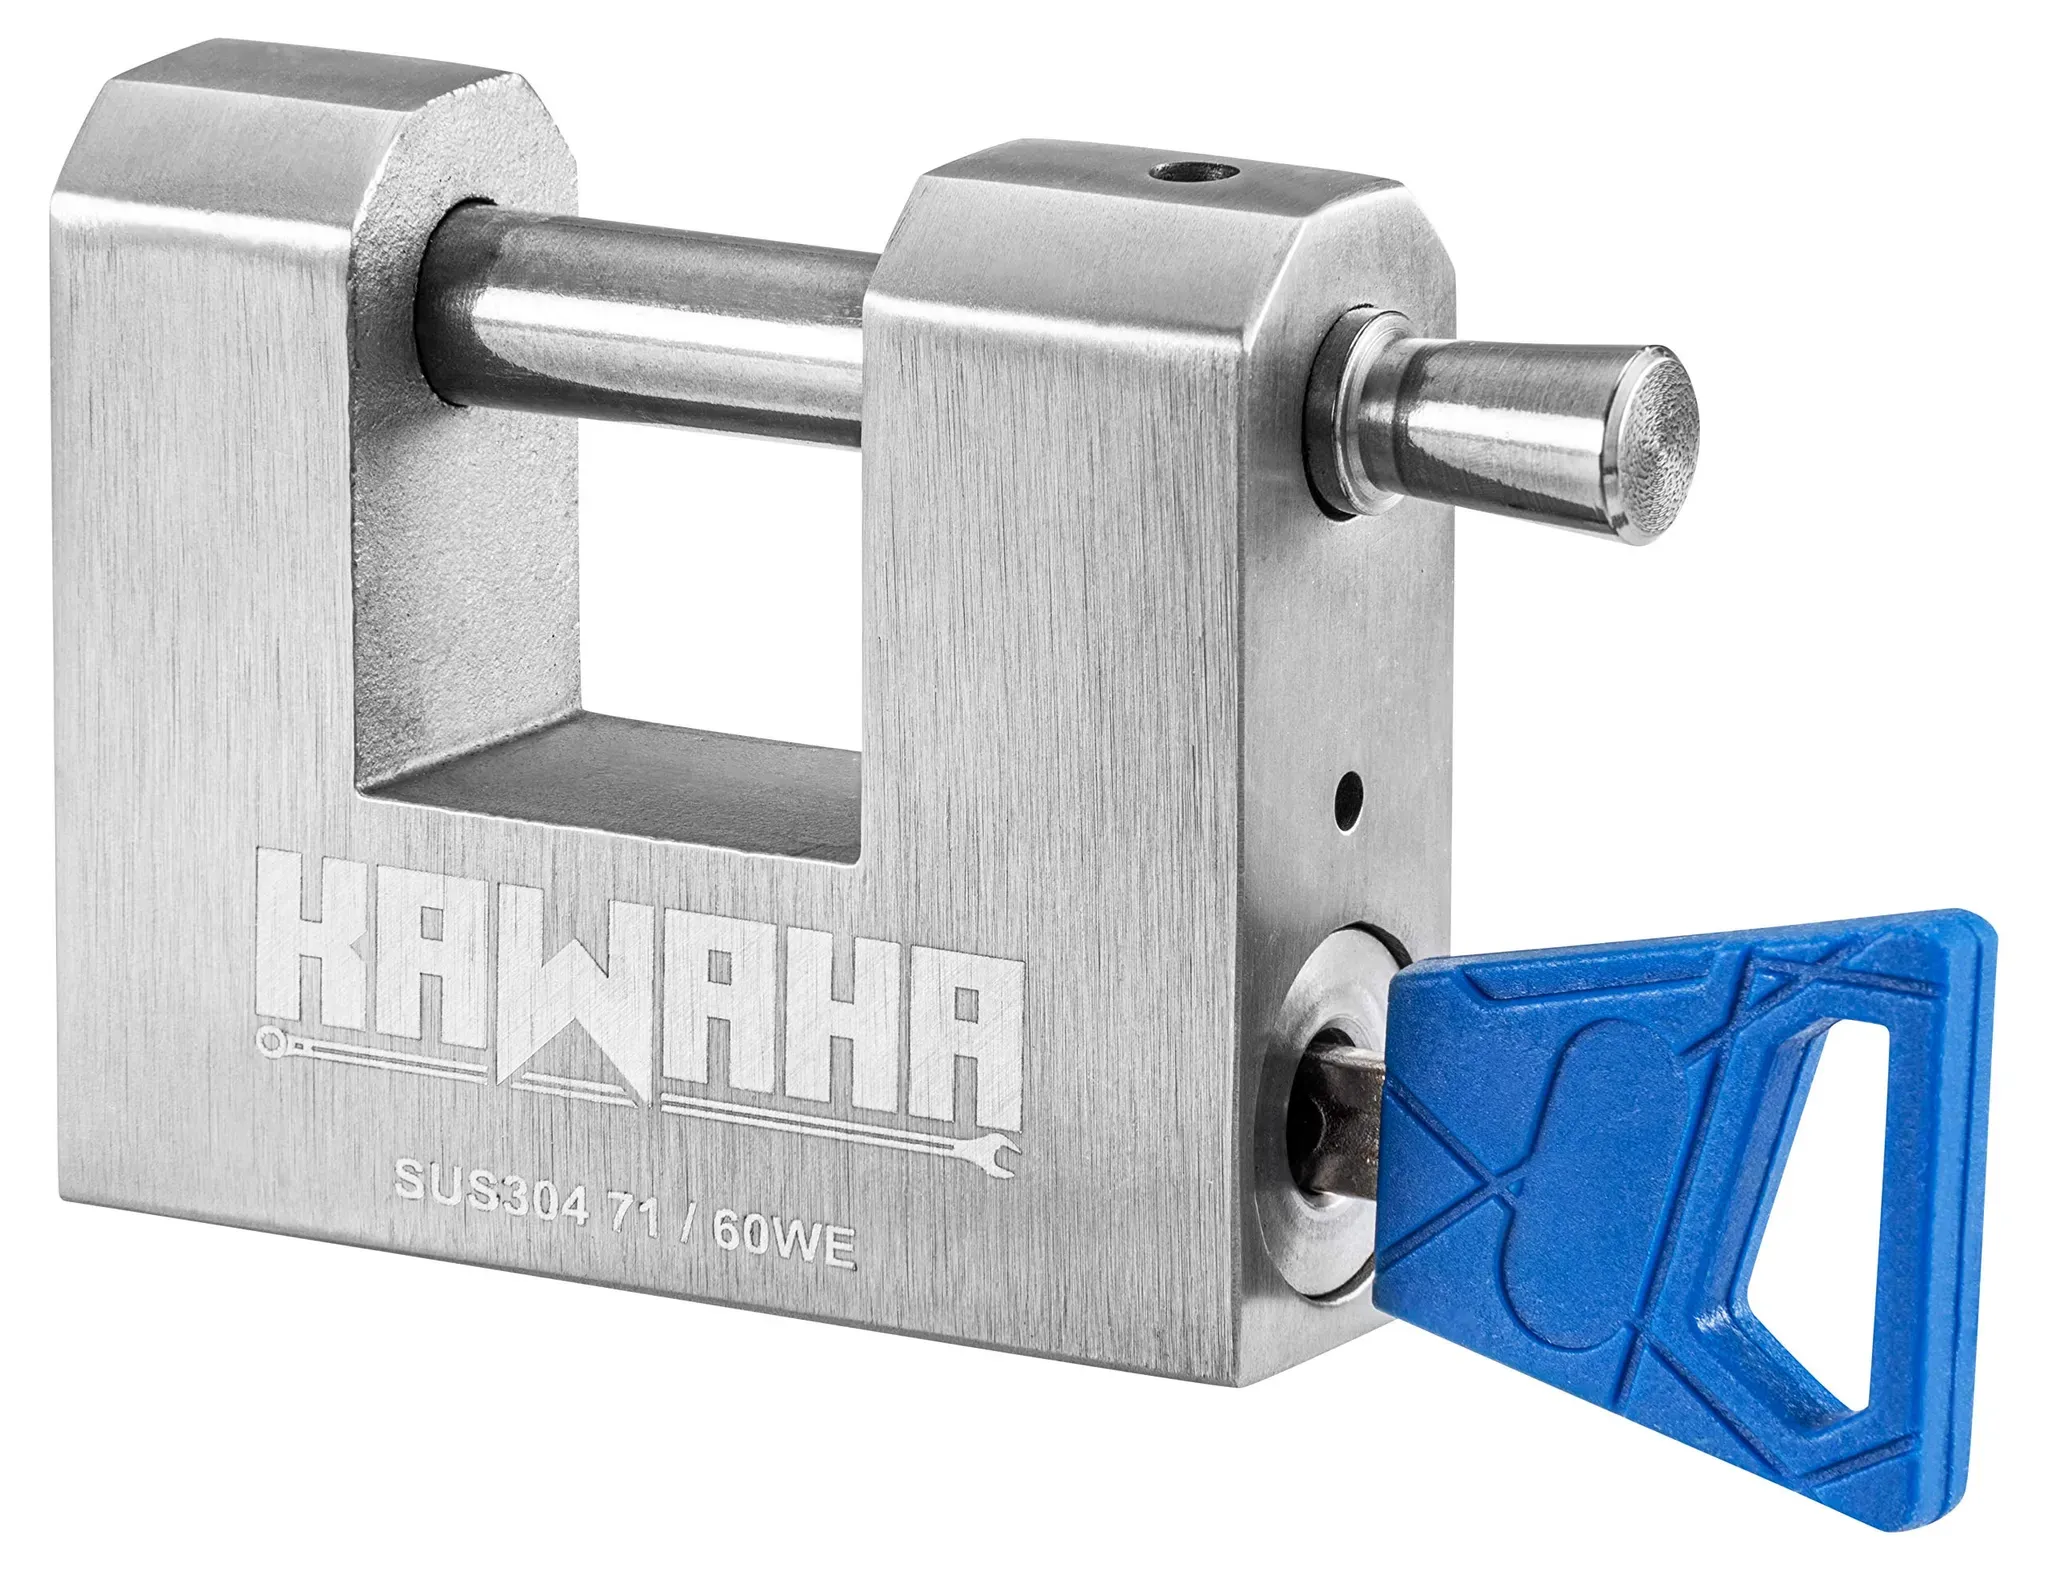 KAWAHA 71/60KD-3K Stainless Steel D-Shaped Padlock with Key for Garage Door, Containers, Shed, Locker and Warehouse (2-3/4 inch, Keyed Different - 3 Keys)